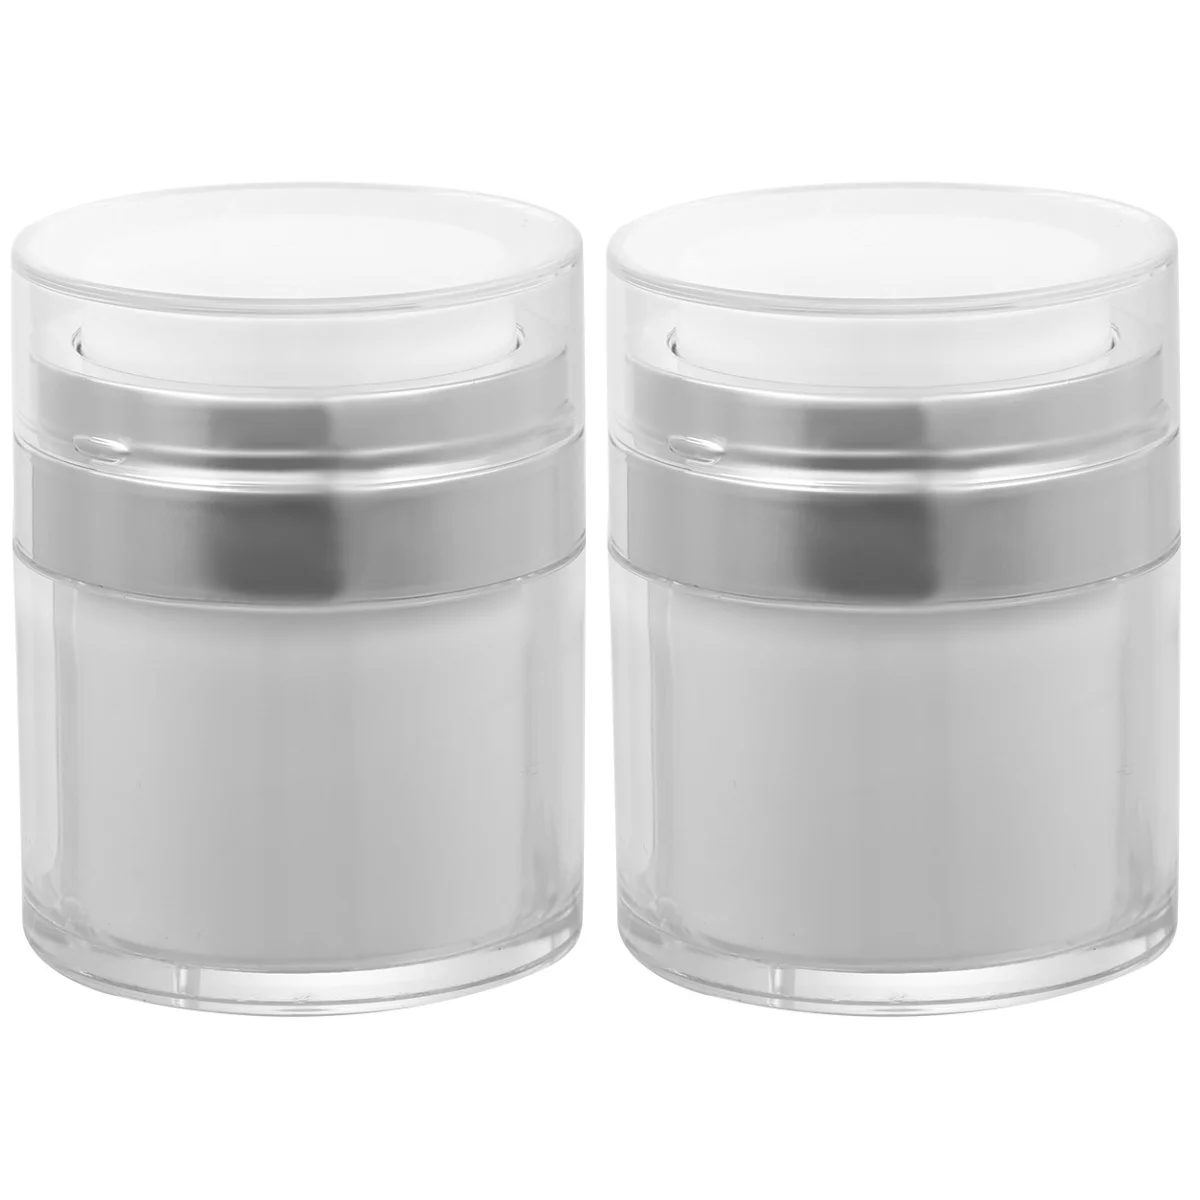 

Cream Jar Jars Bottles Case Makeup Airless Travel Vacuum Foundation Container Lotion Lotions Creams Bottle Box Containers